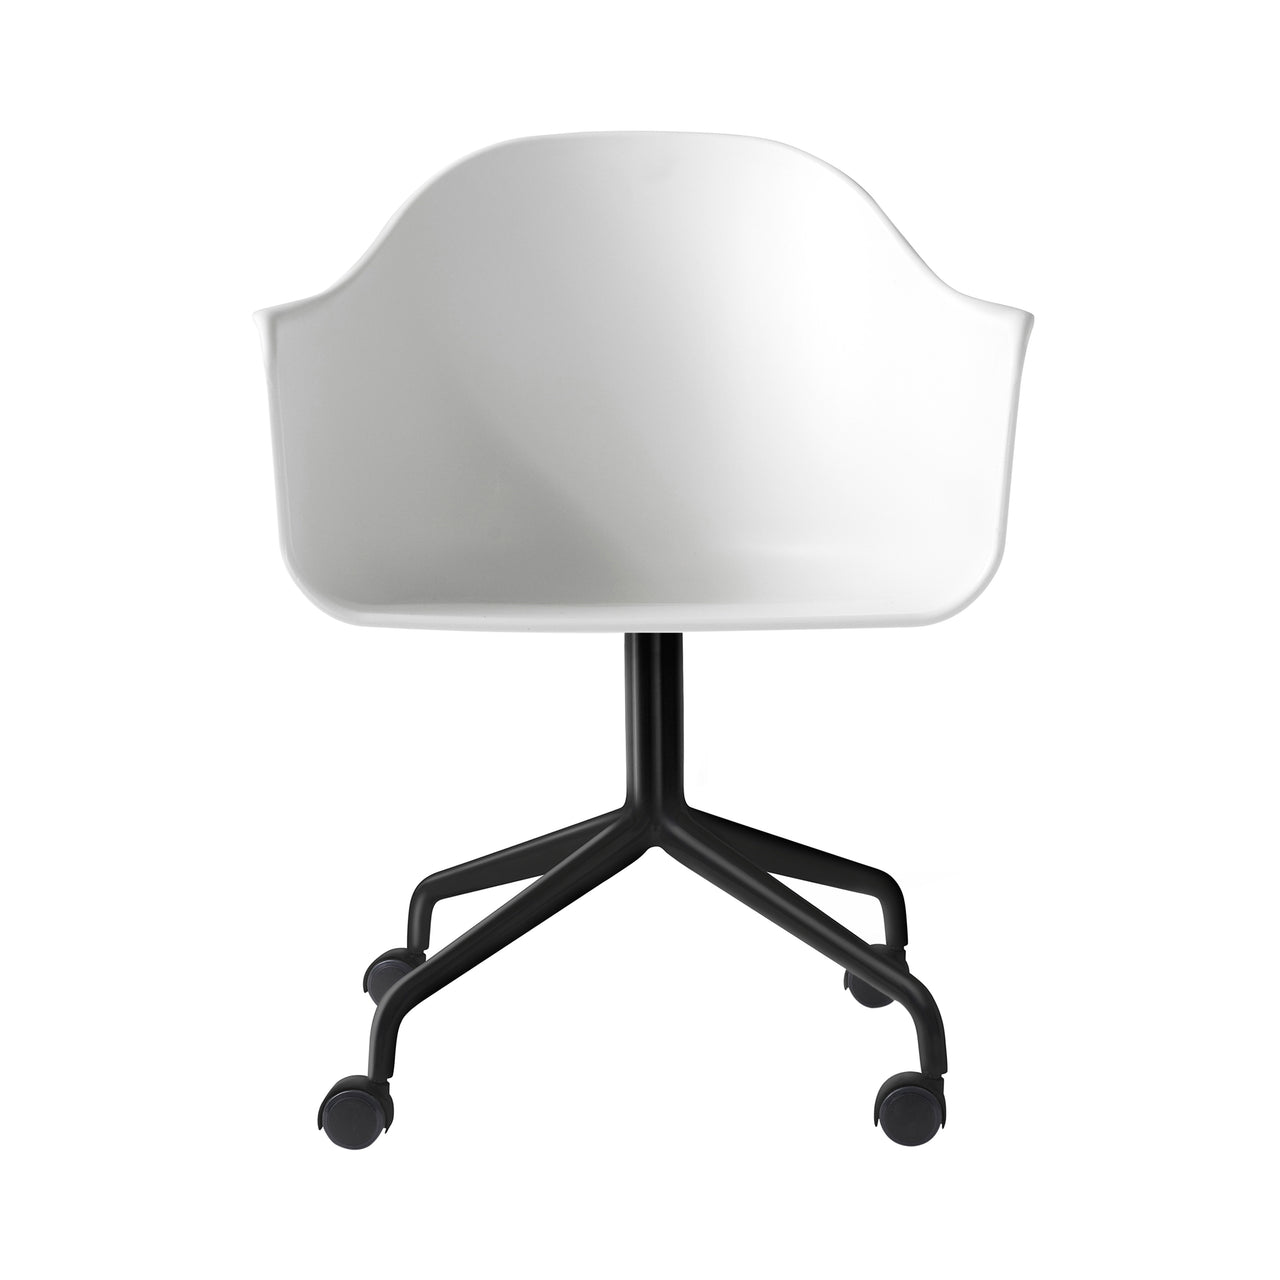 Harbour Dining Chair Star Base with Casters: Black Steel + White